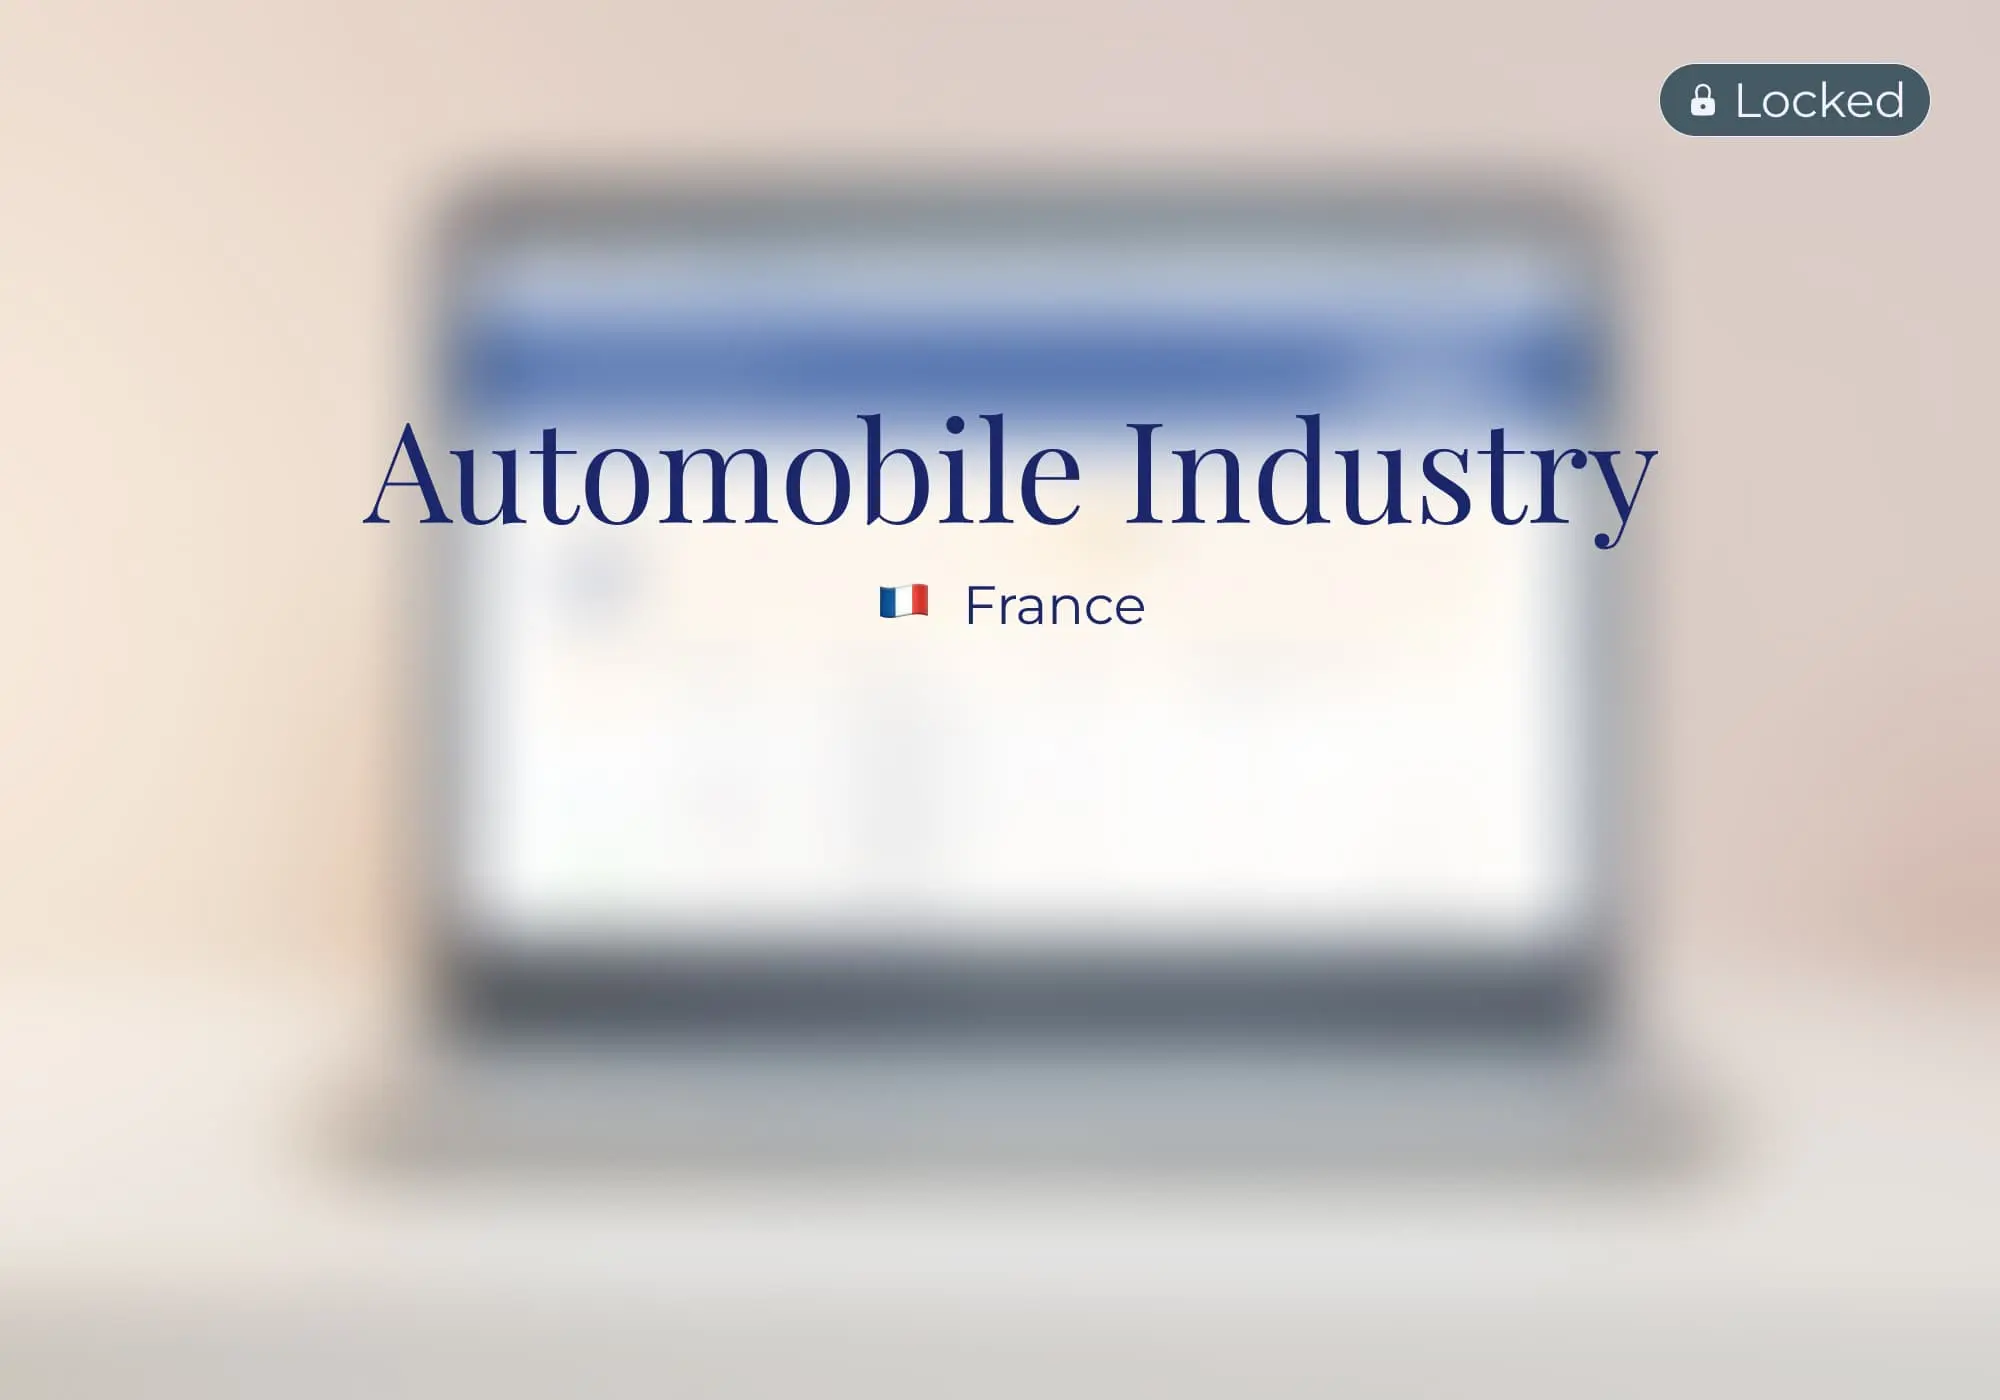 Portfolio: UX/UI Design project for the French Automotive industry